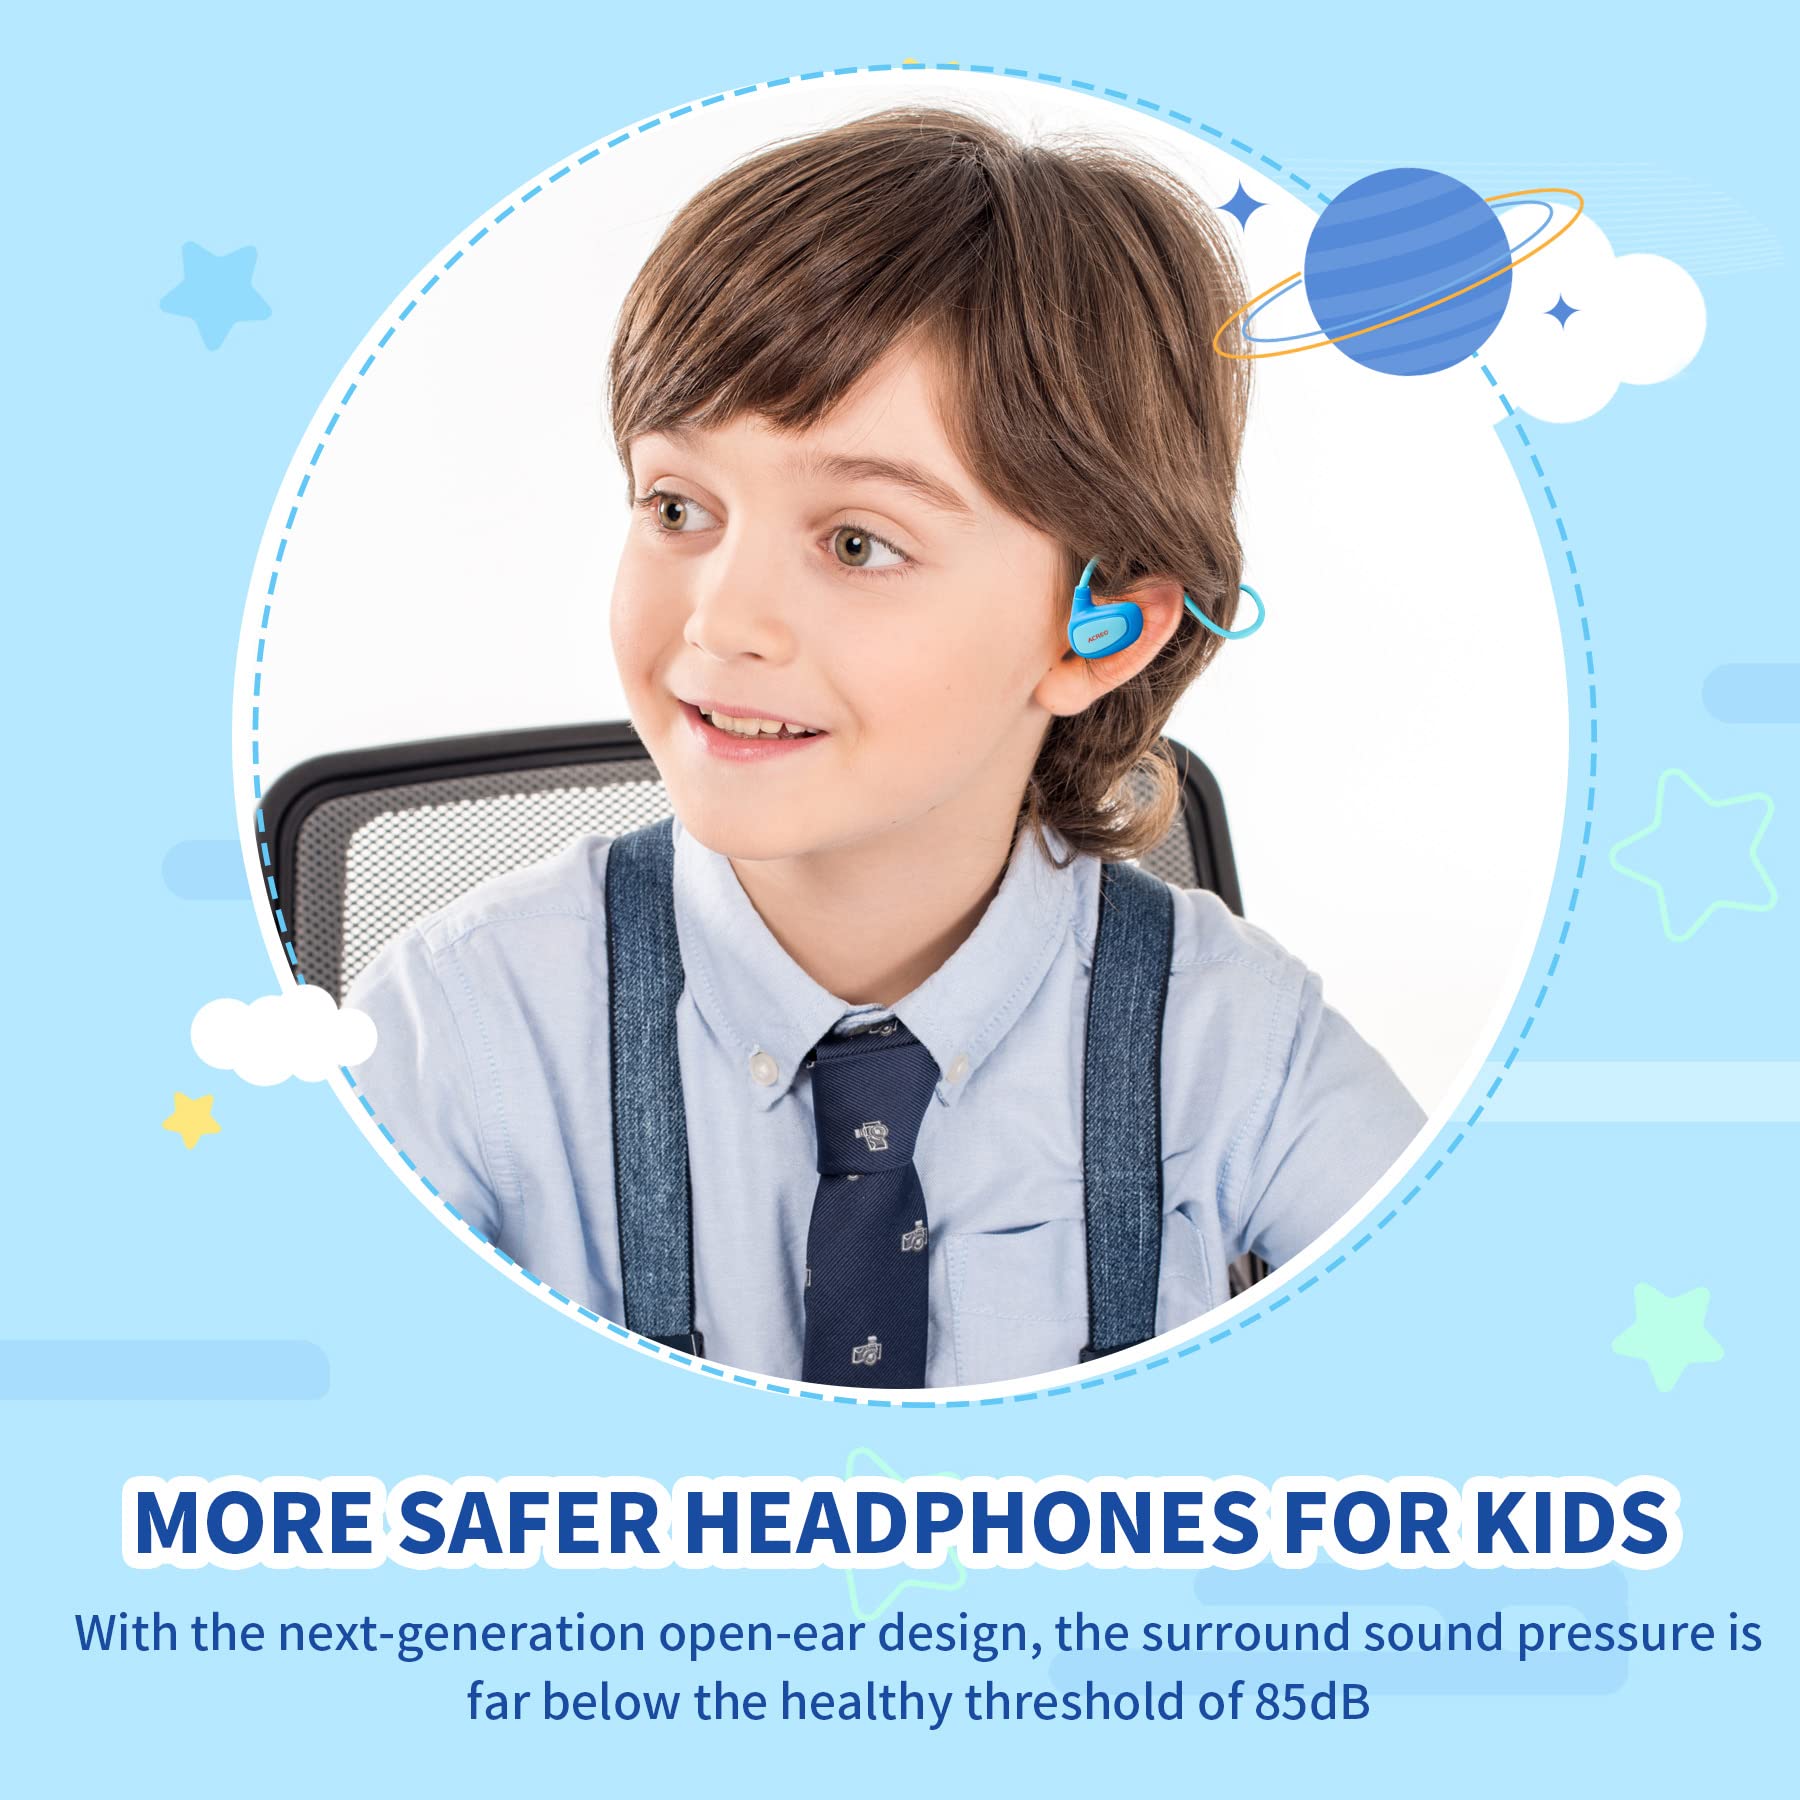 ACREO Kids Headphones, Open Ear Bluetooth Headphones with MIC, OpenBuds Kids, Ultra-Light, Portable and Safer for Children, Best Wireless Kids Headphones for iPad, Tablet or Computers (Navy Blue)